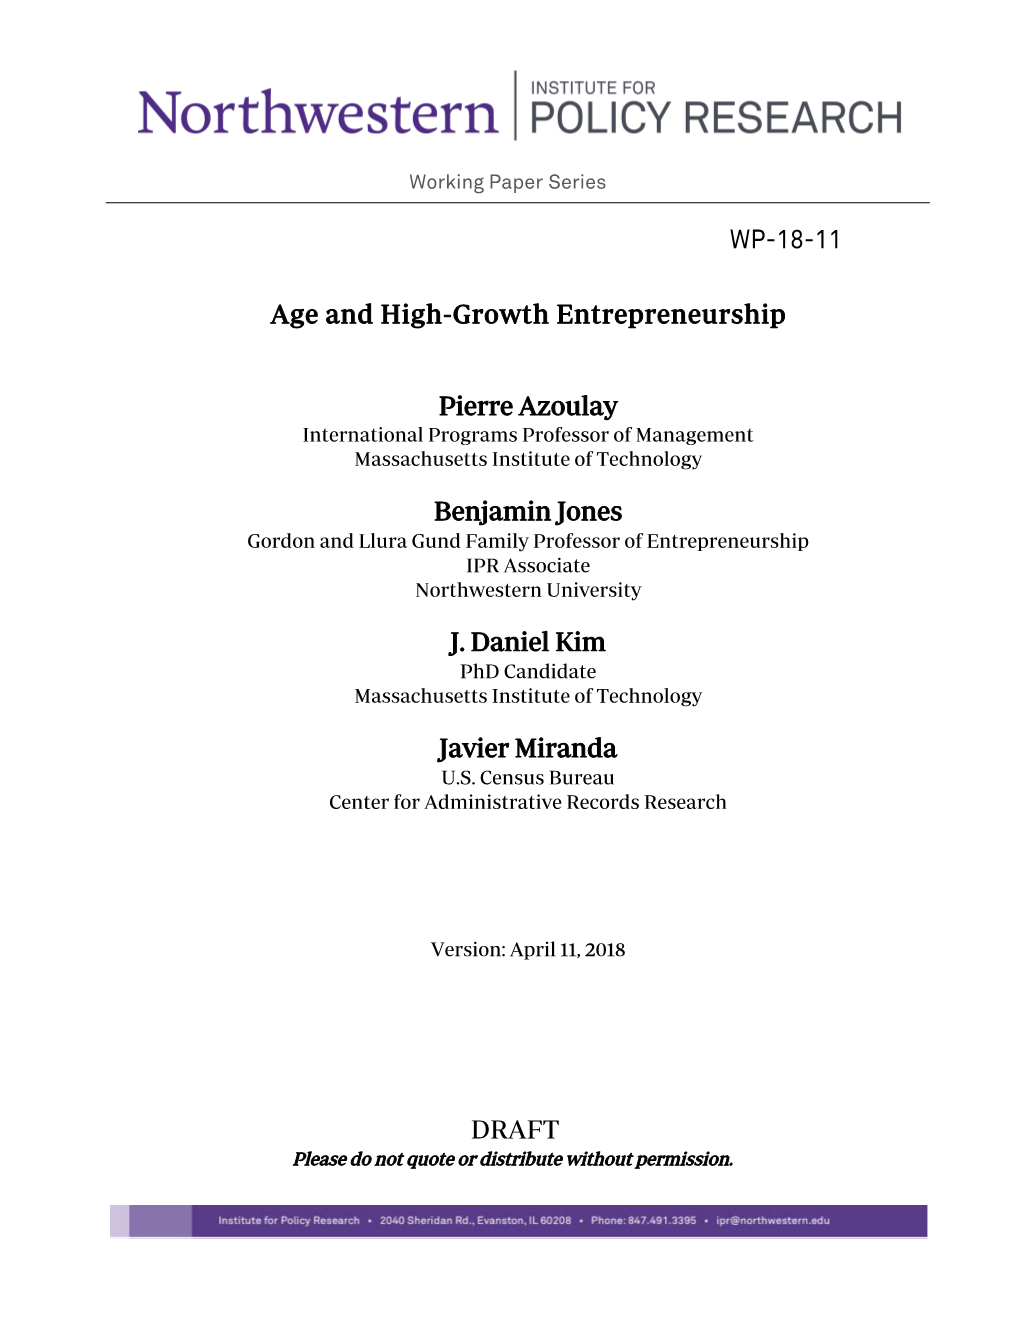 Age and High-Growth Entrepreneurship Pierre Azoulay